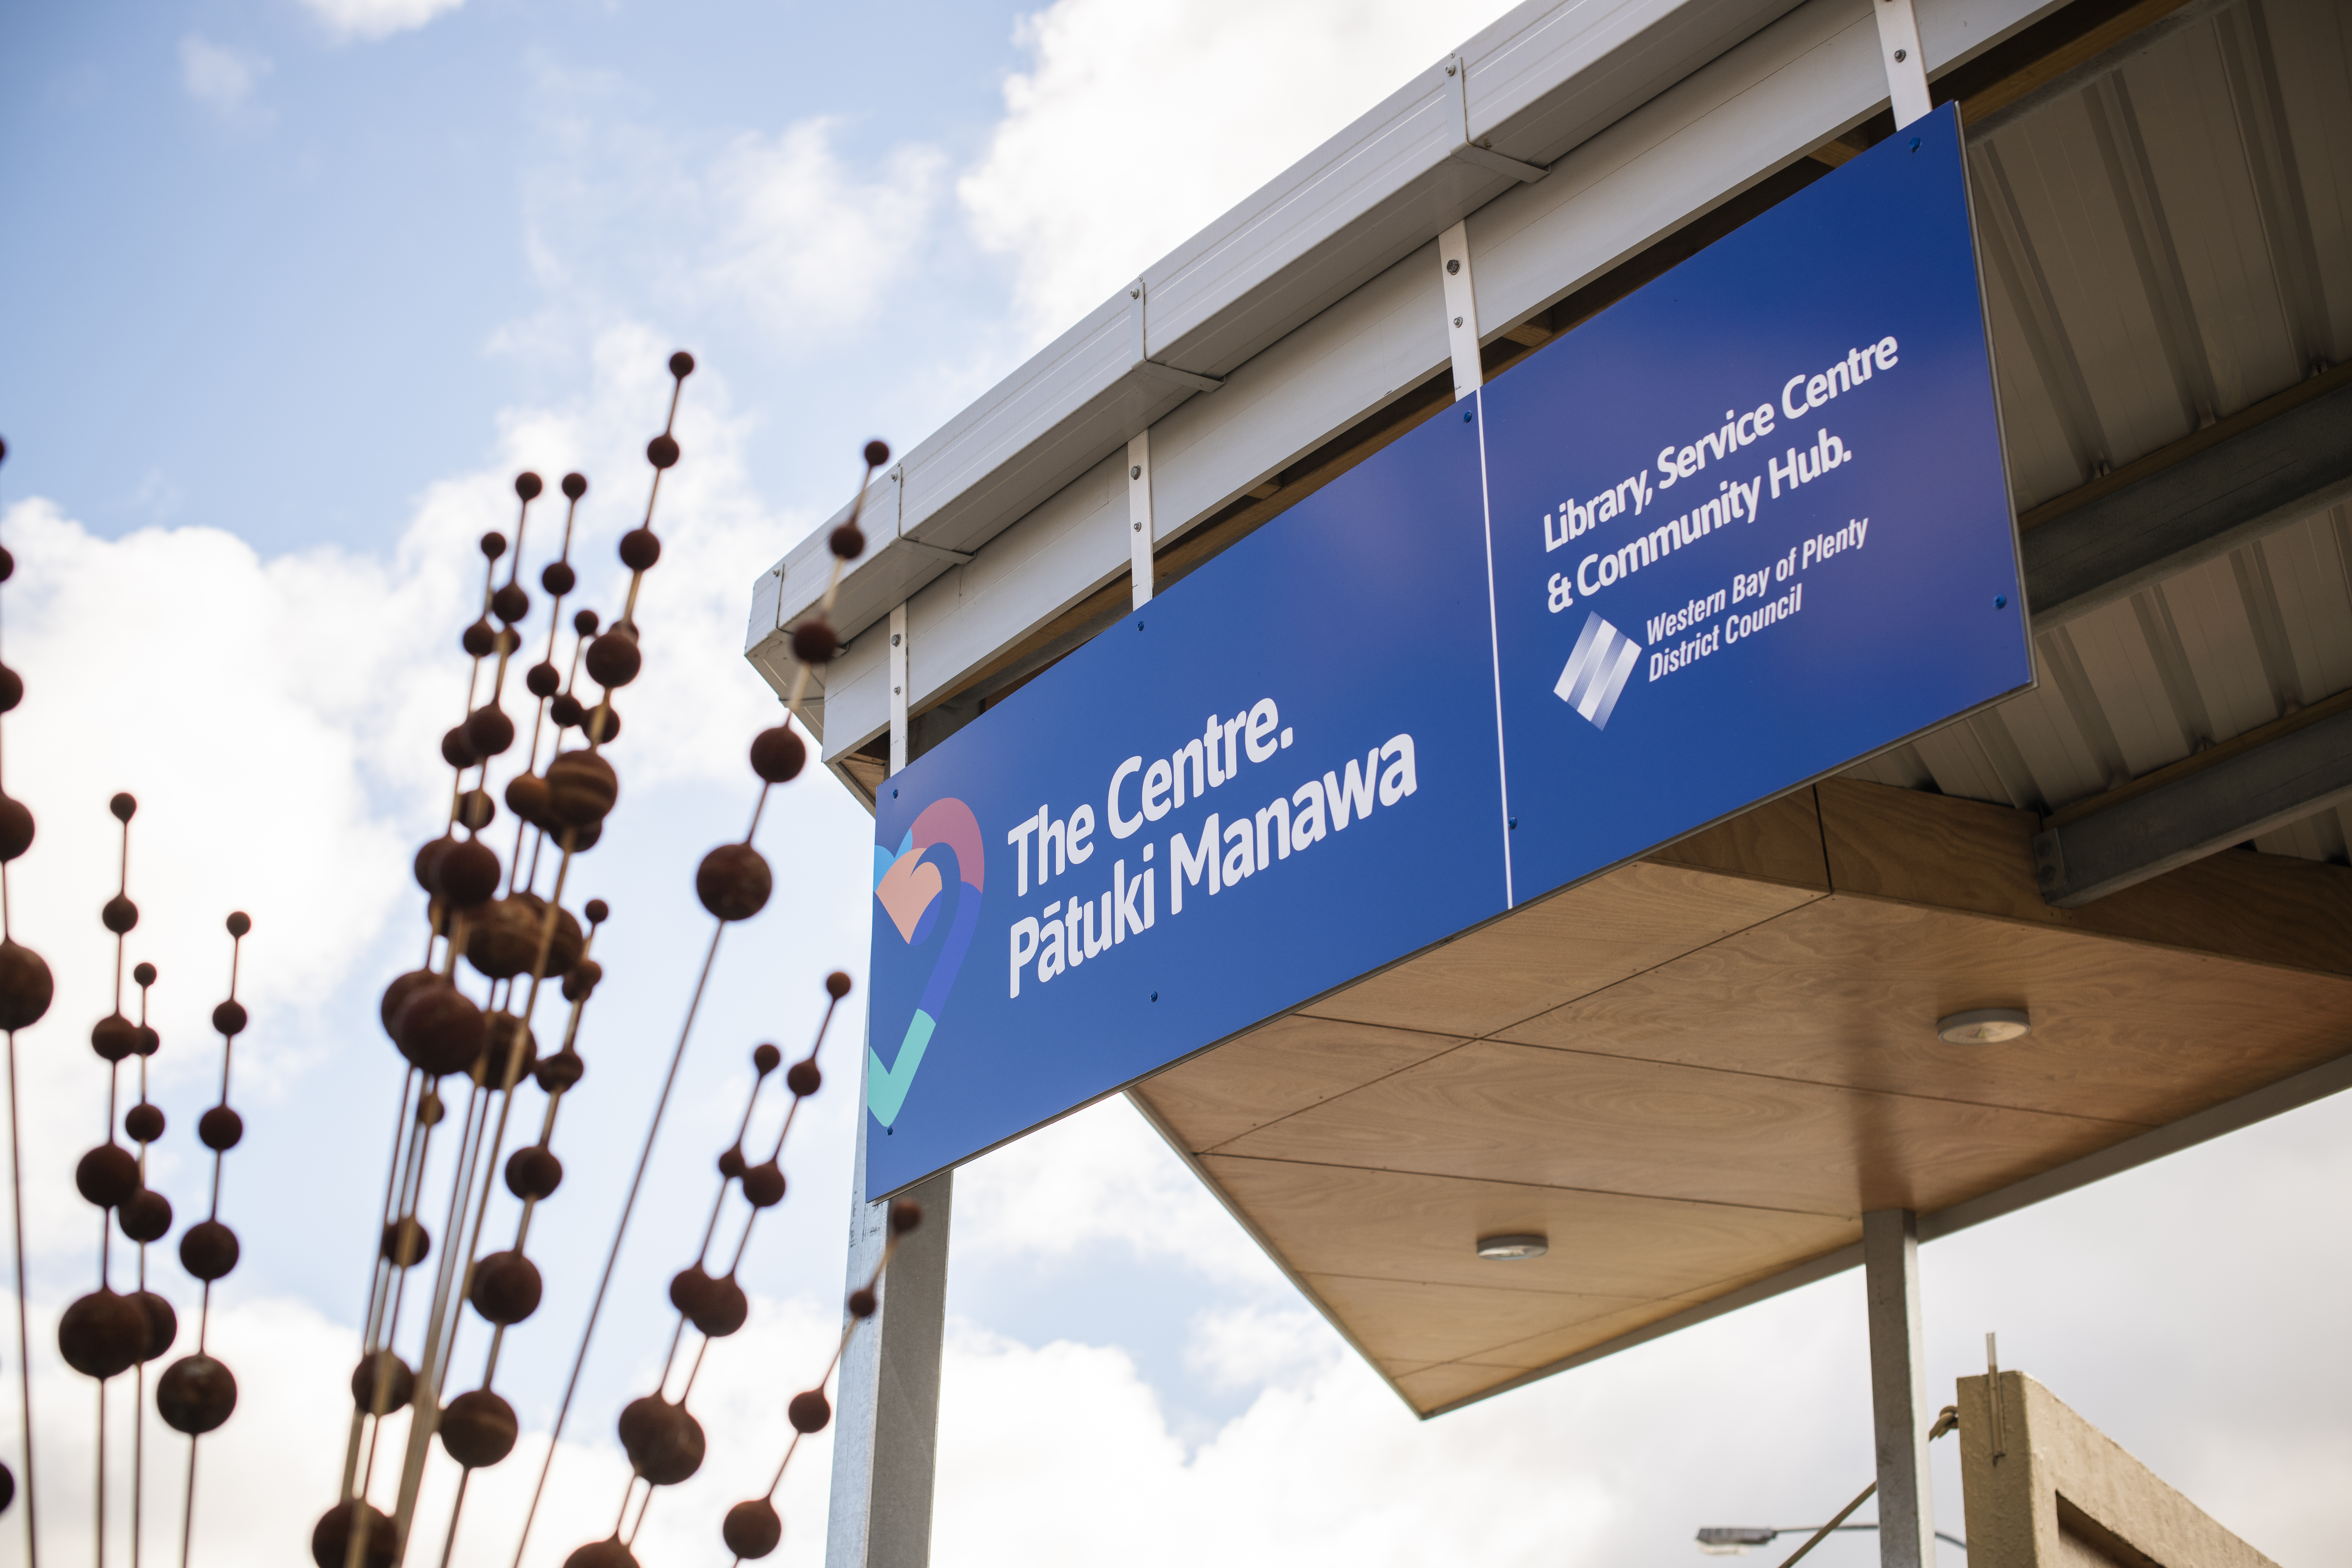 The Centre - Pātuki Manawa along with other libraries, service centres, swimming pools and recycling centres across the District will close at 5pm today, Monday 23 March. 